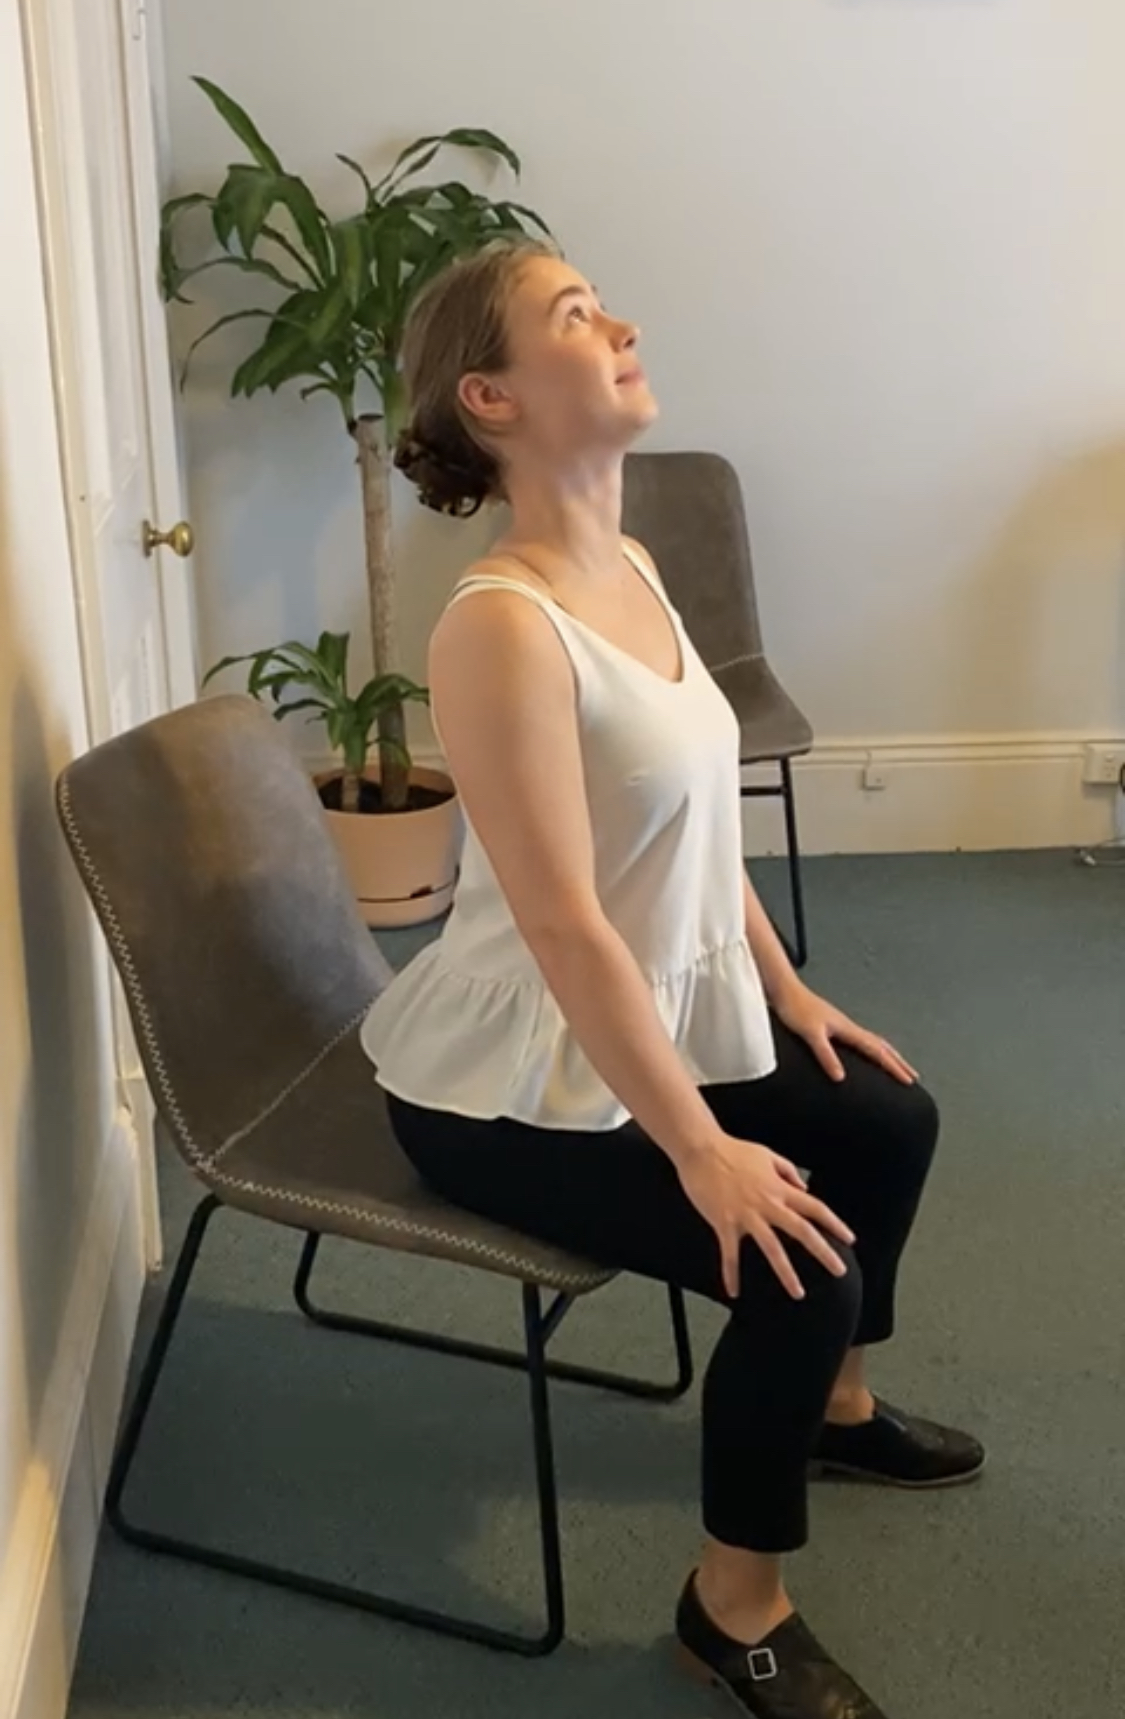 adelaide osteopath resilient health chiropractor massage osteopathy cat camelchair3